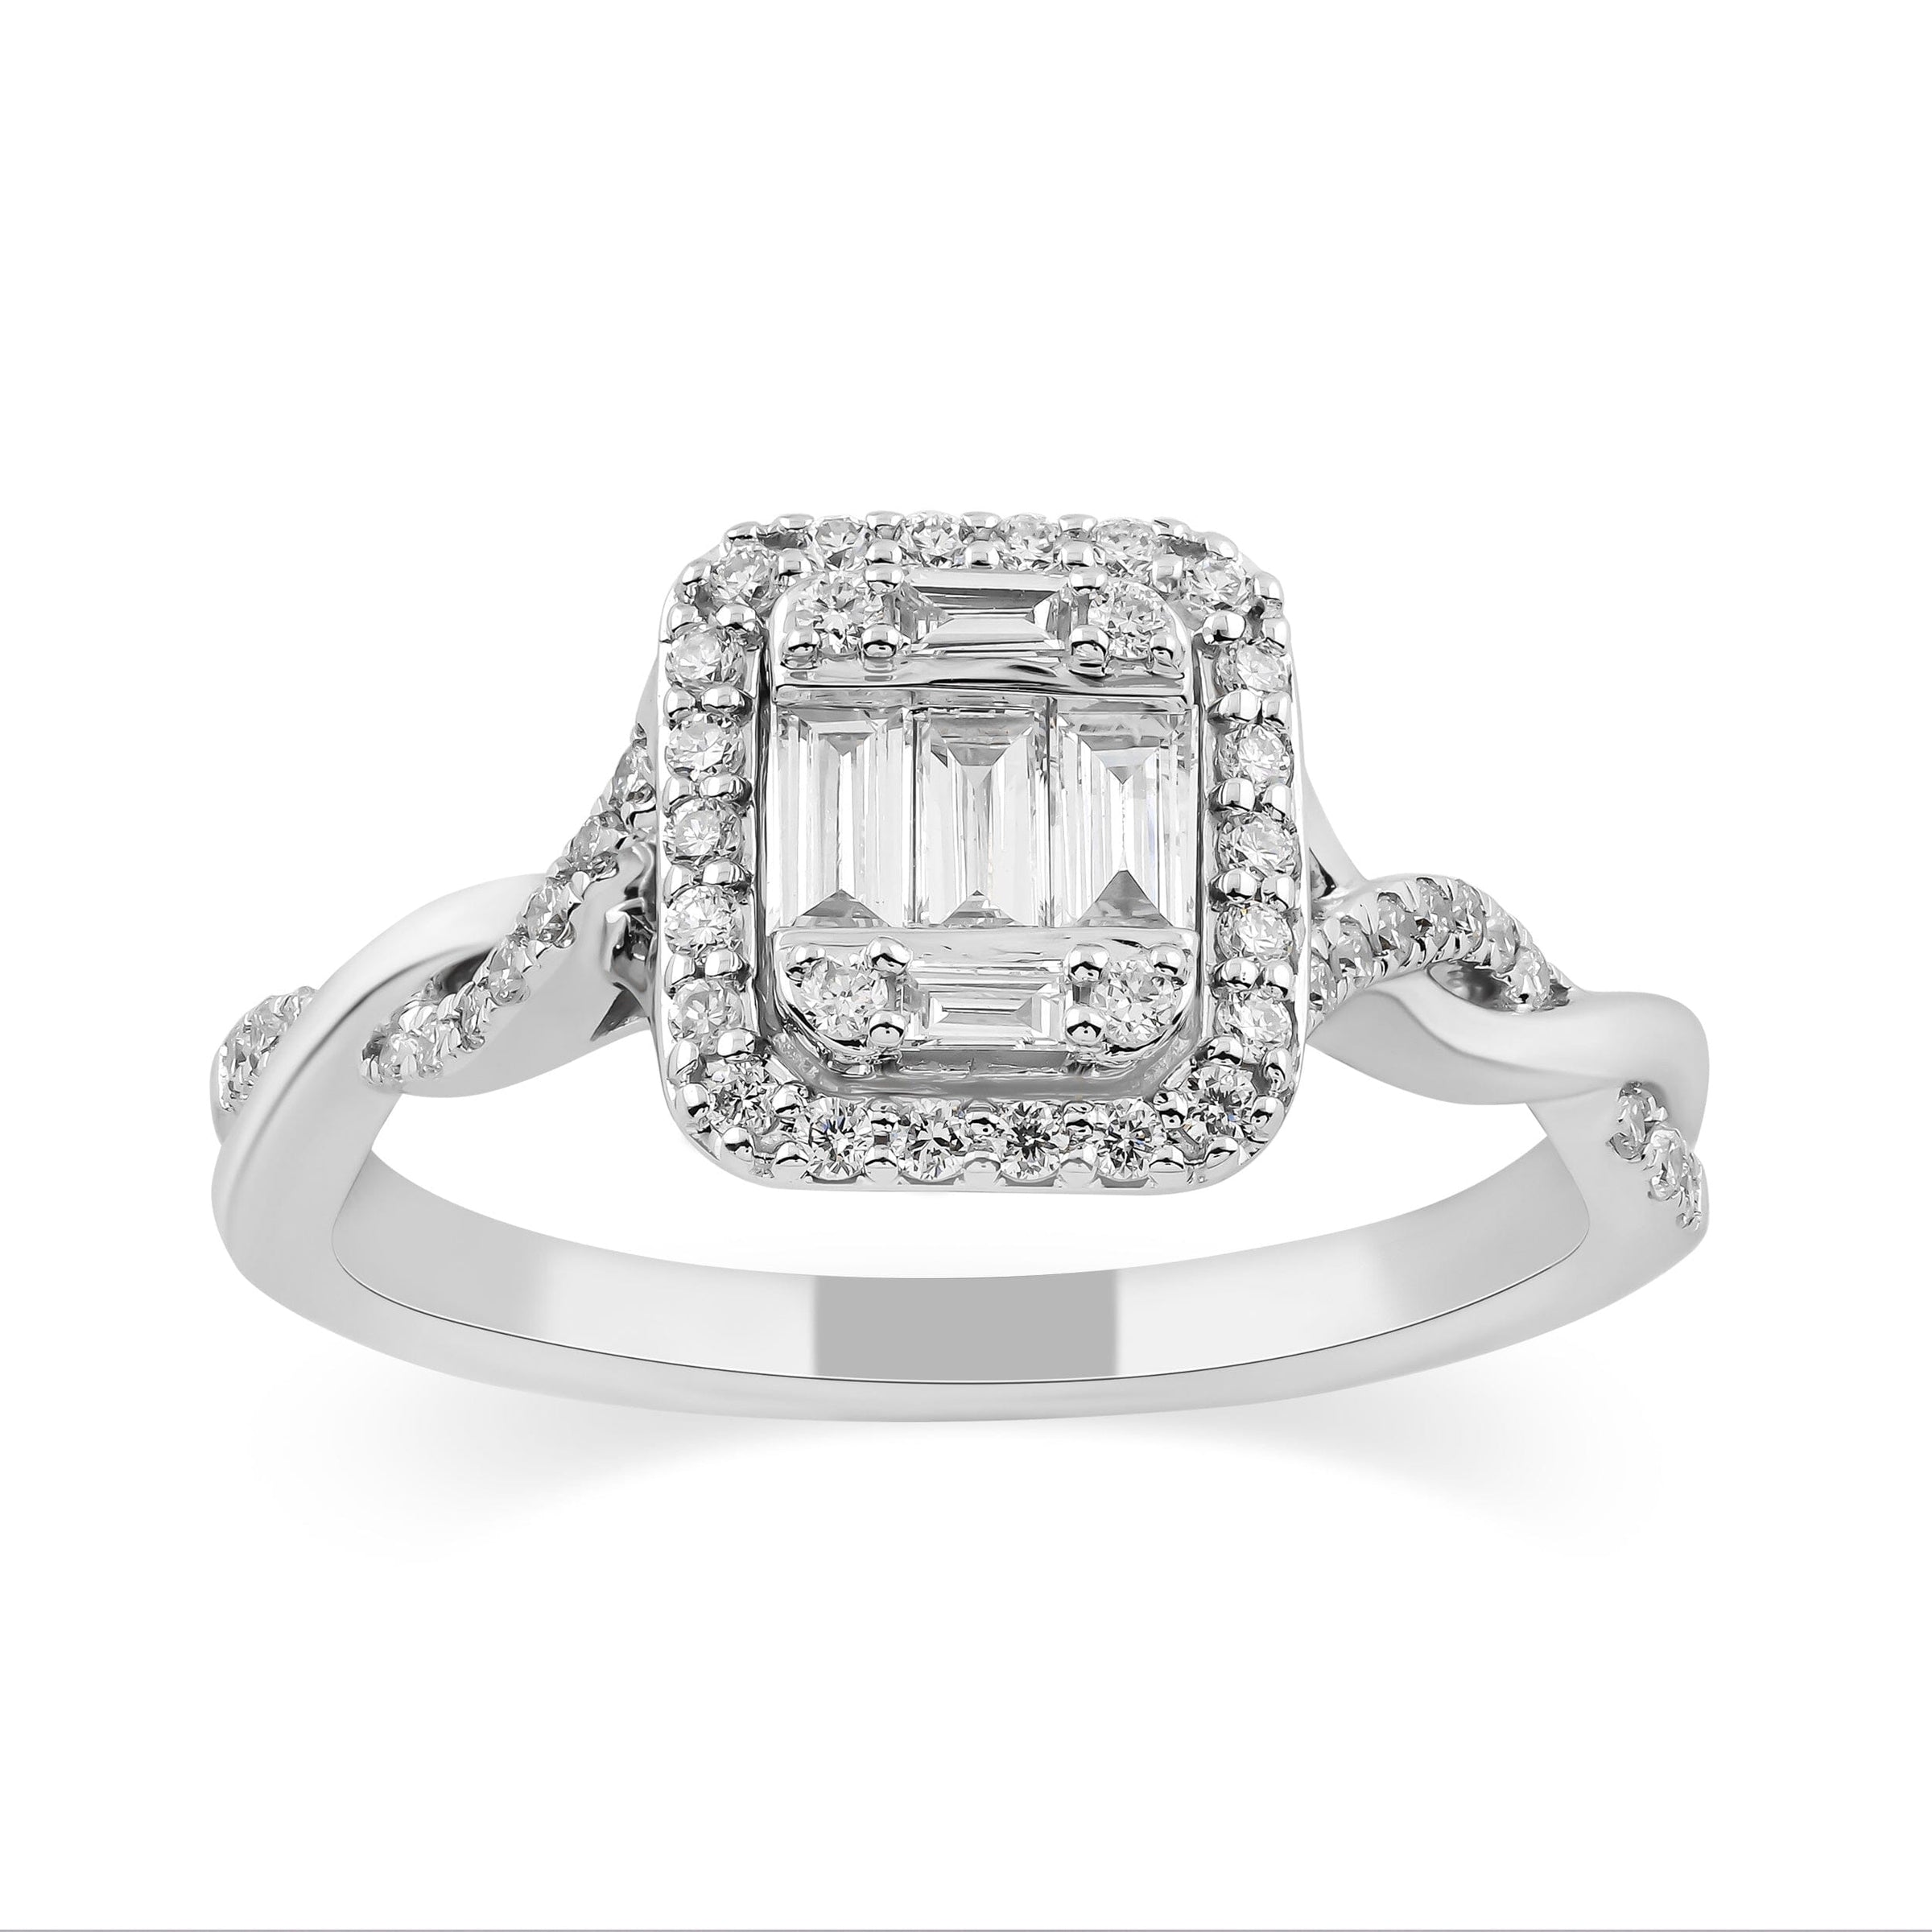 Meera Emerald Cut Ring with 0.40ct of Laboratory Grown Diamonds in 9ct White Gold Rings Bevilles 